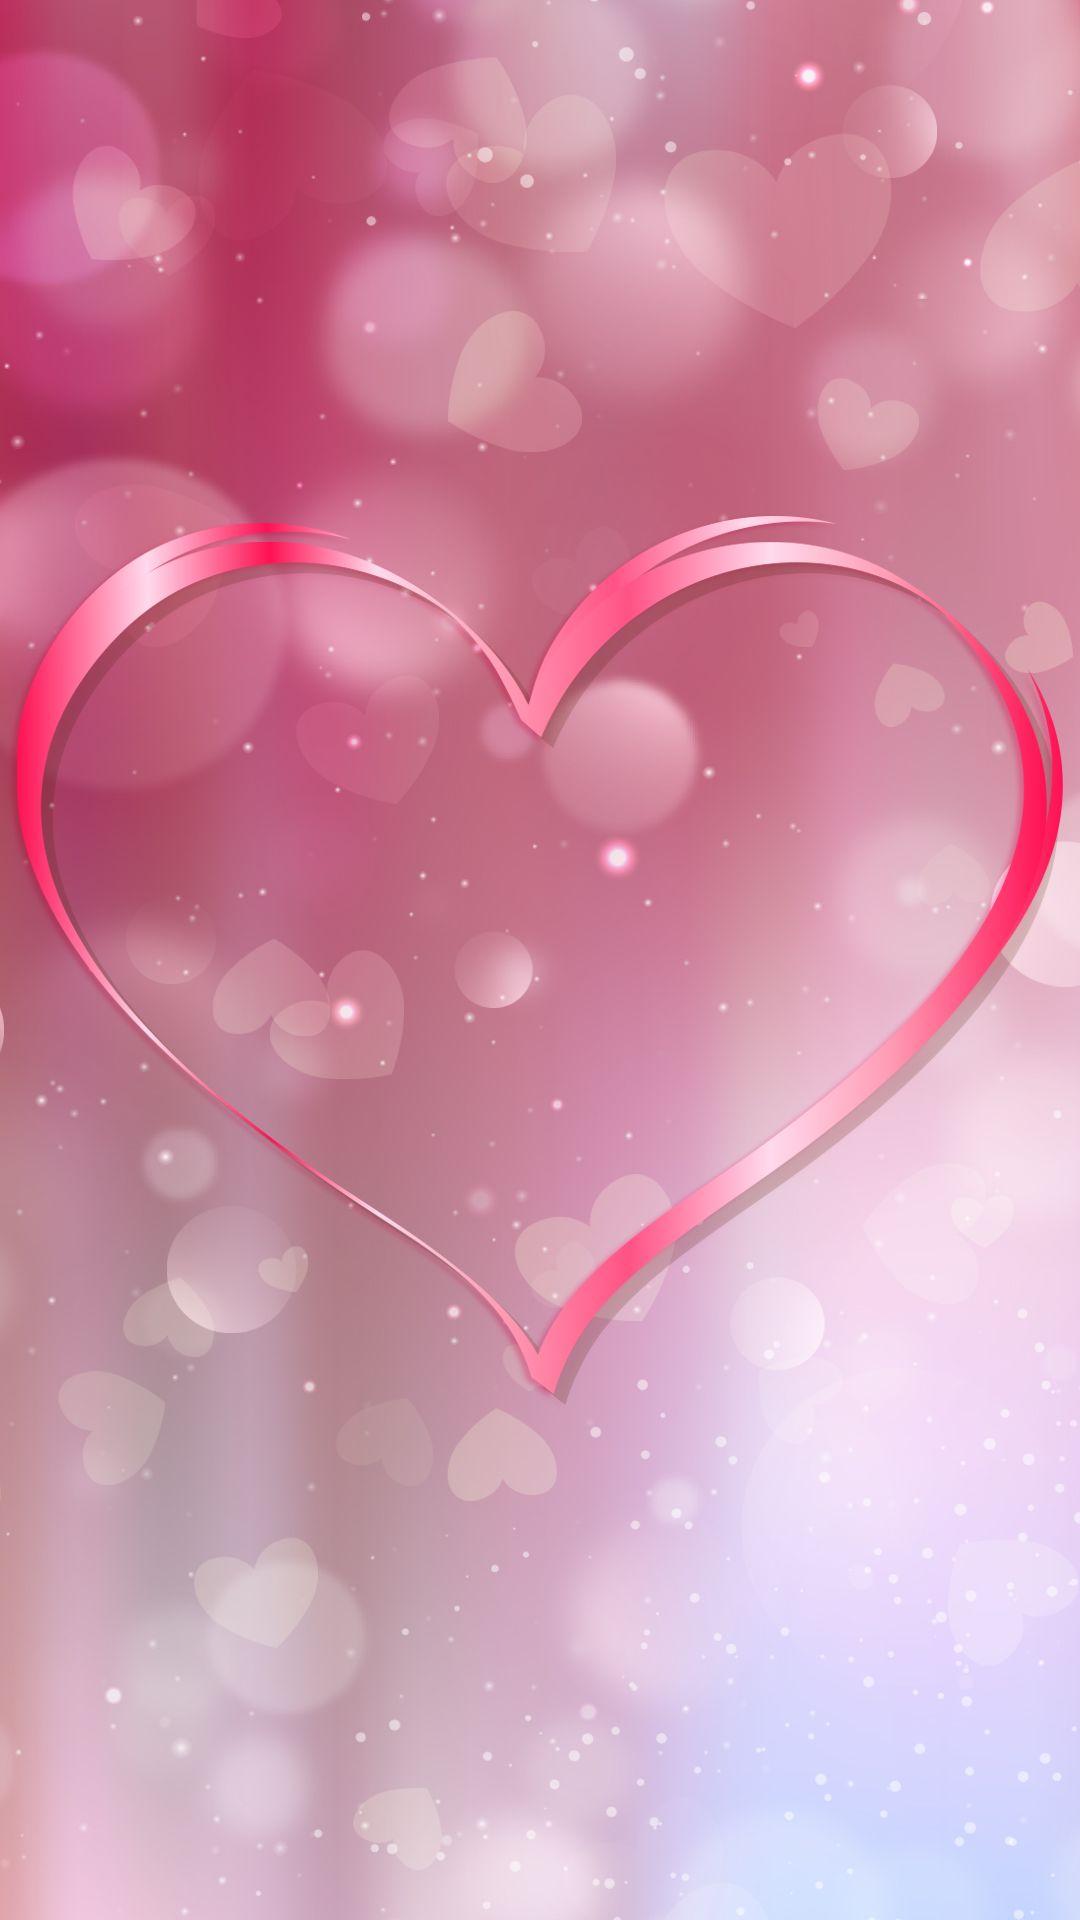 Heart Wallpapers HD For Mobile - Wallpaper Cave